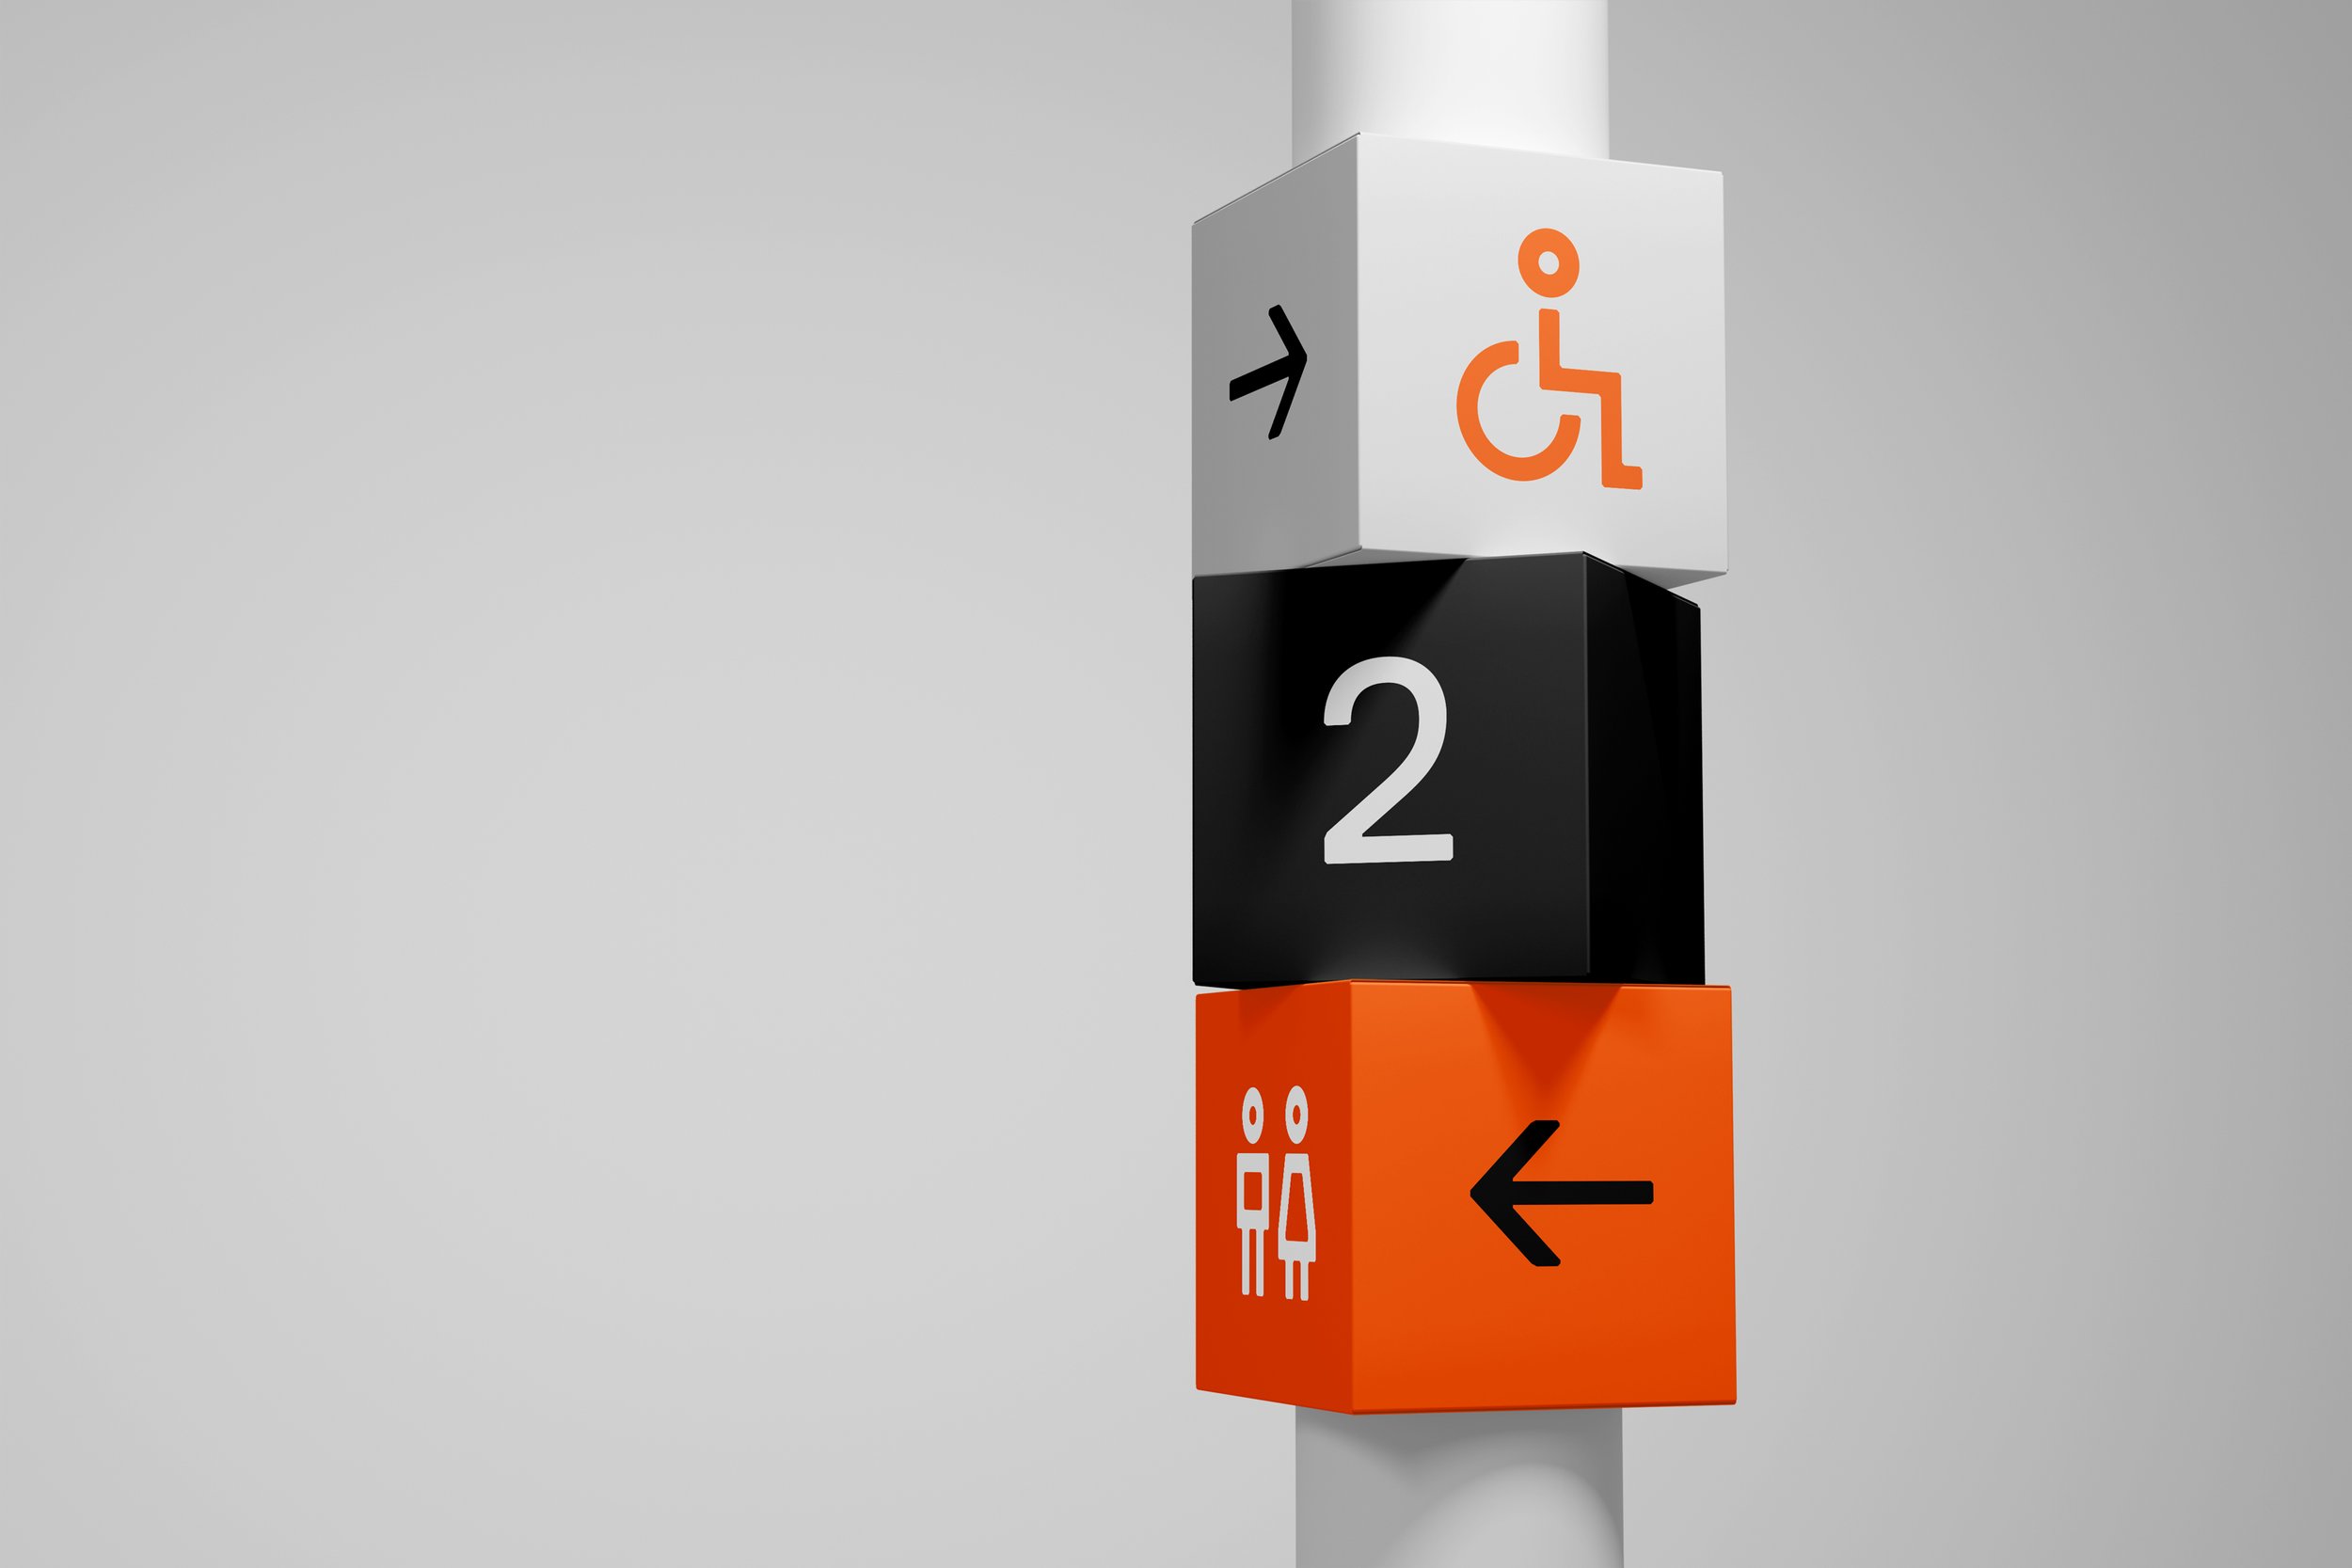 Icons from Sporveien's visual identity - On a metal pole